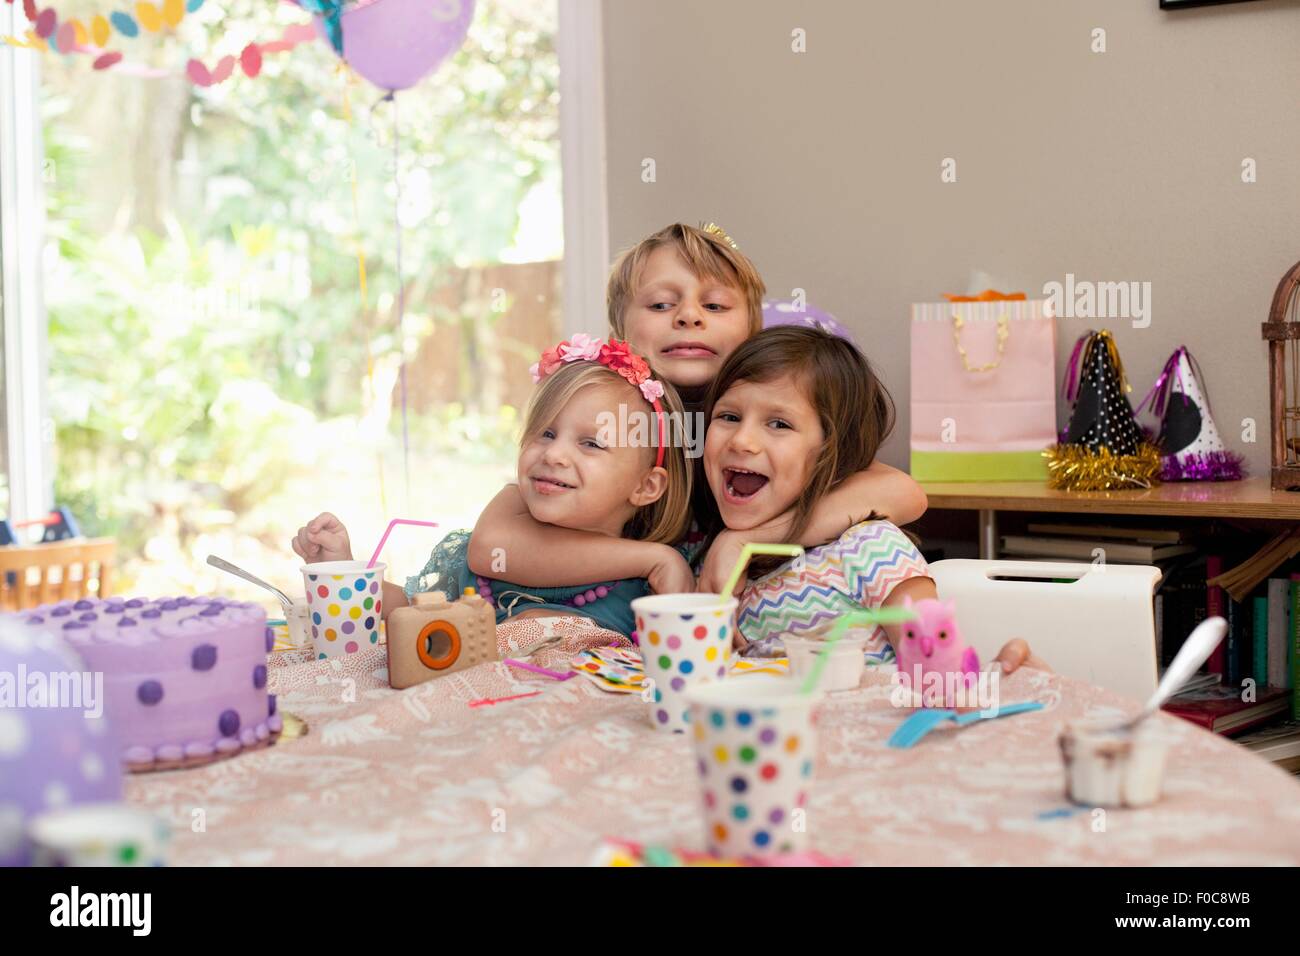 Three children sitting at birthday party table hugging each other Stock Photo